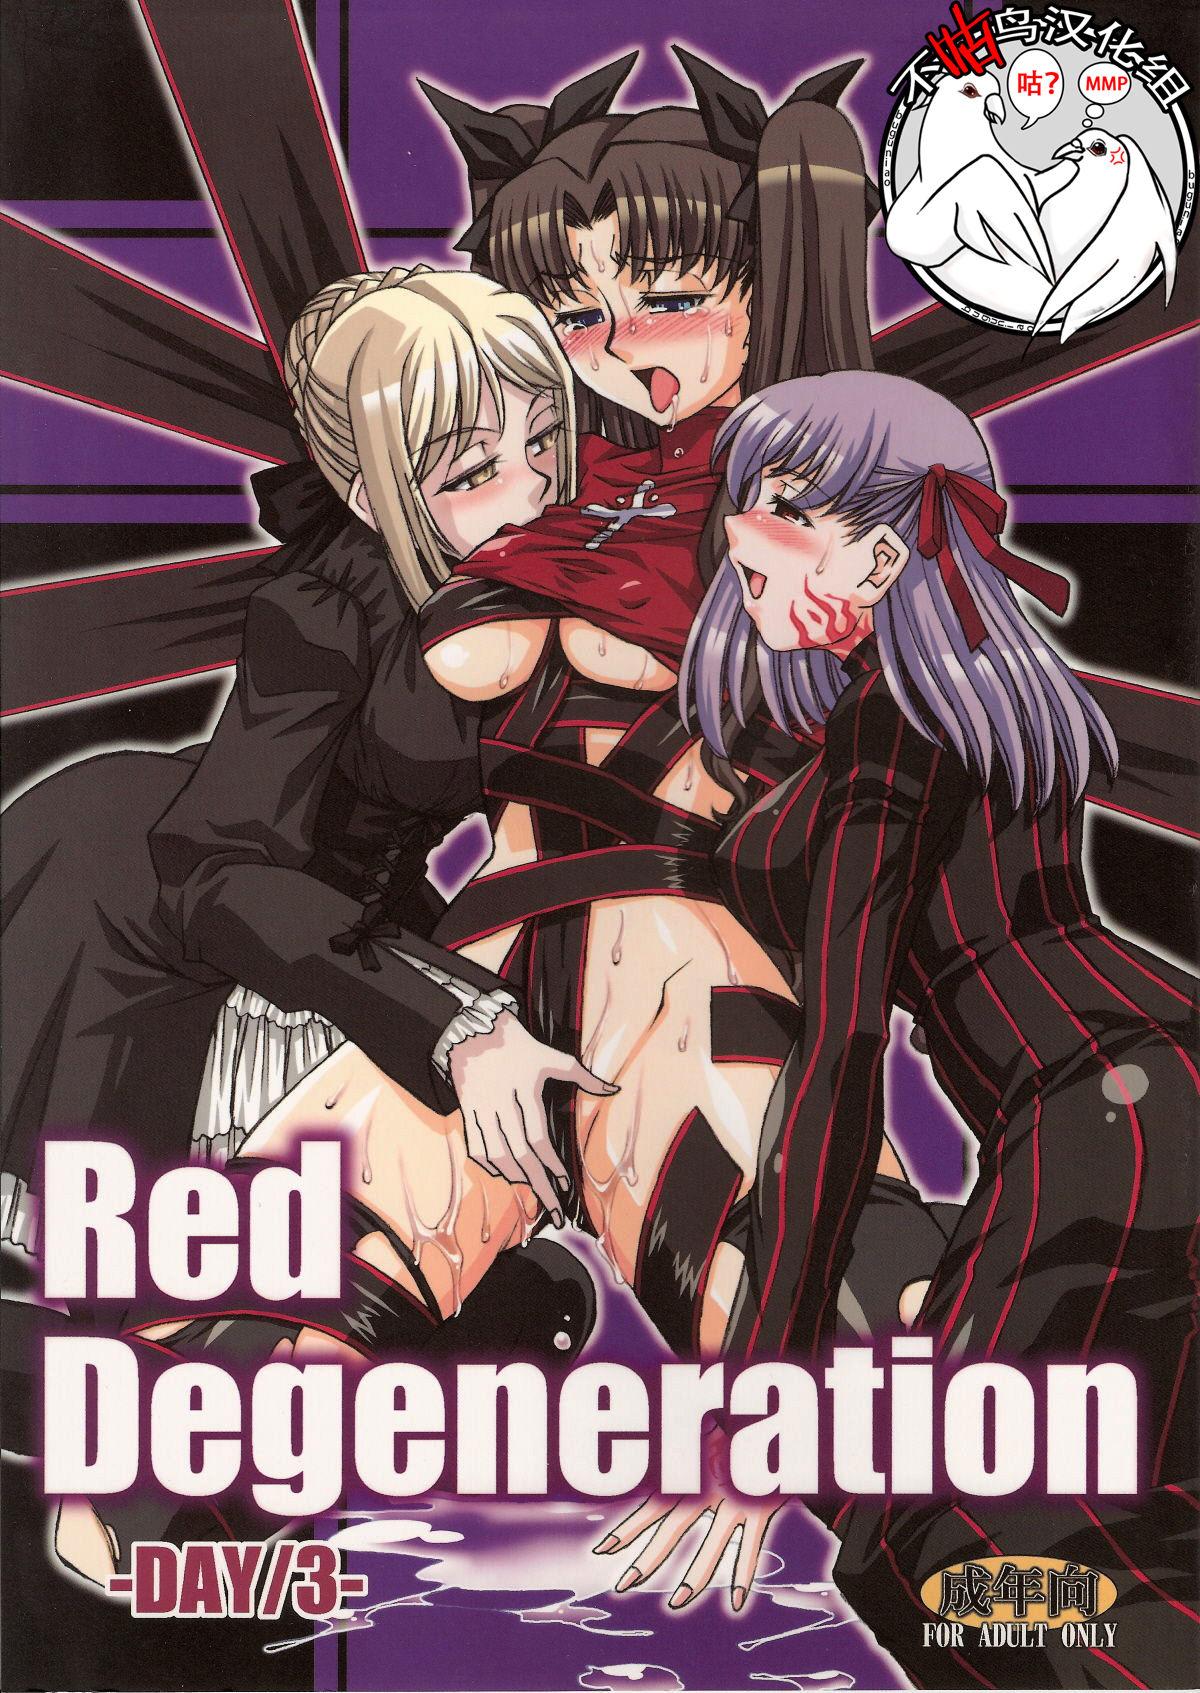 Cutie Red Degeneration - Fate stay night Suck - Picture 1